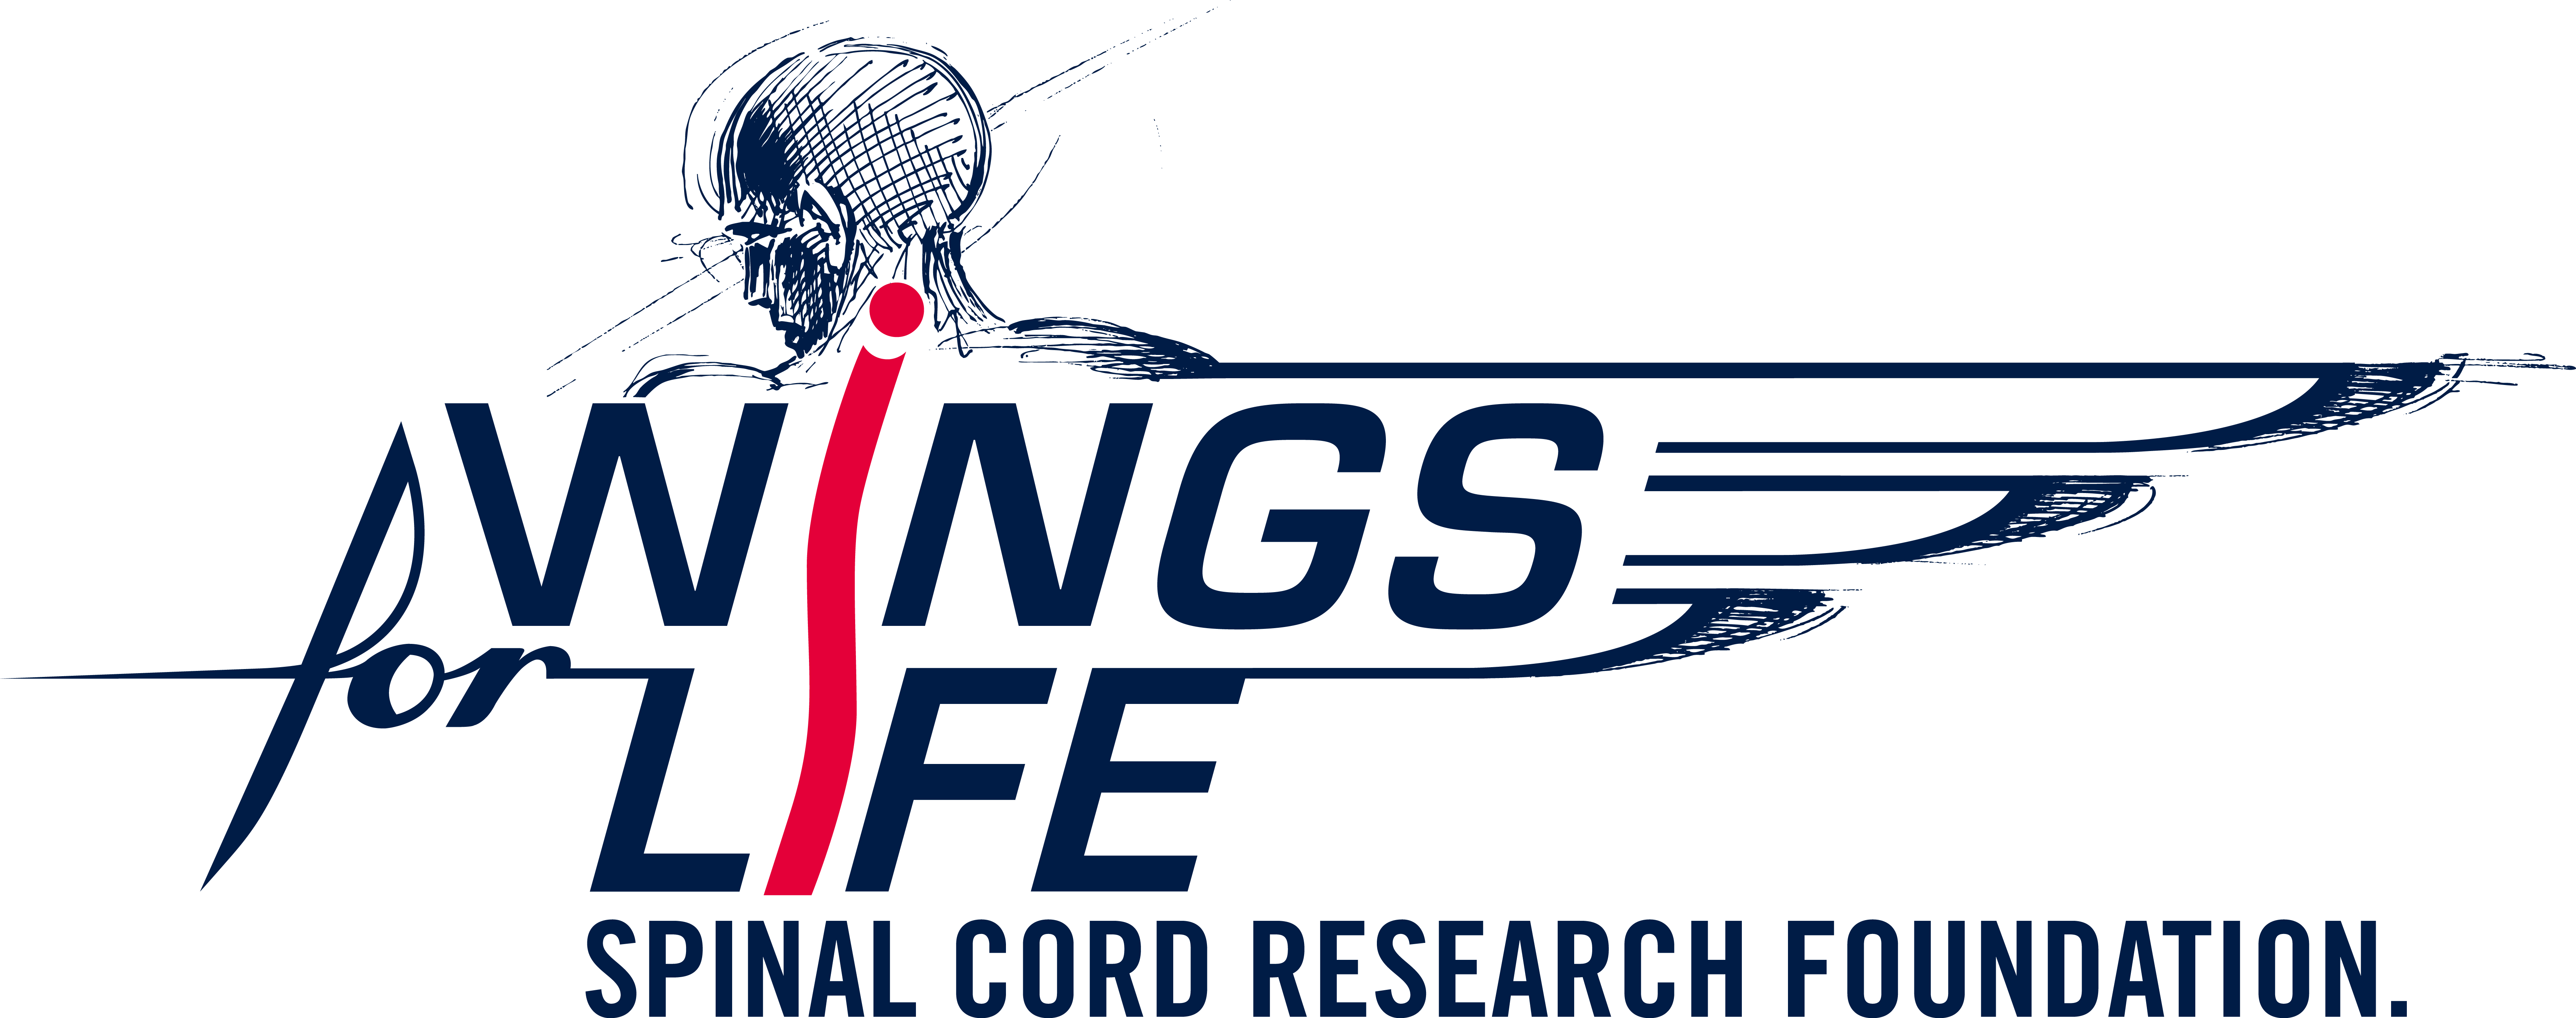 Fundraising for Wings for Life USA Spinal Cord Research Foundation, Inc.